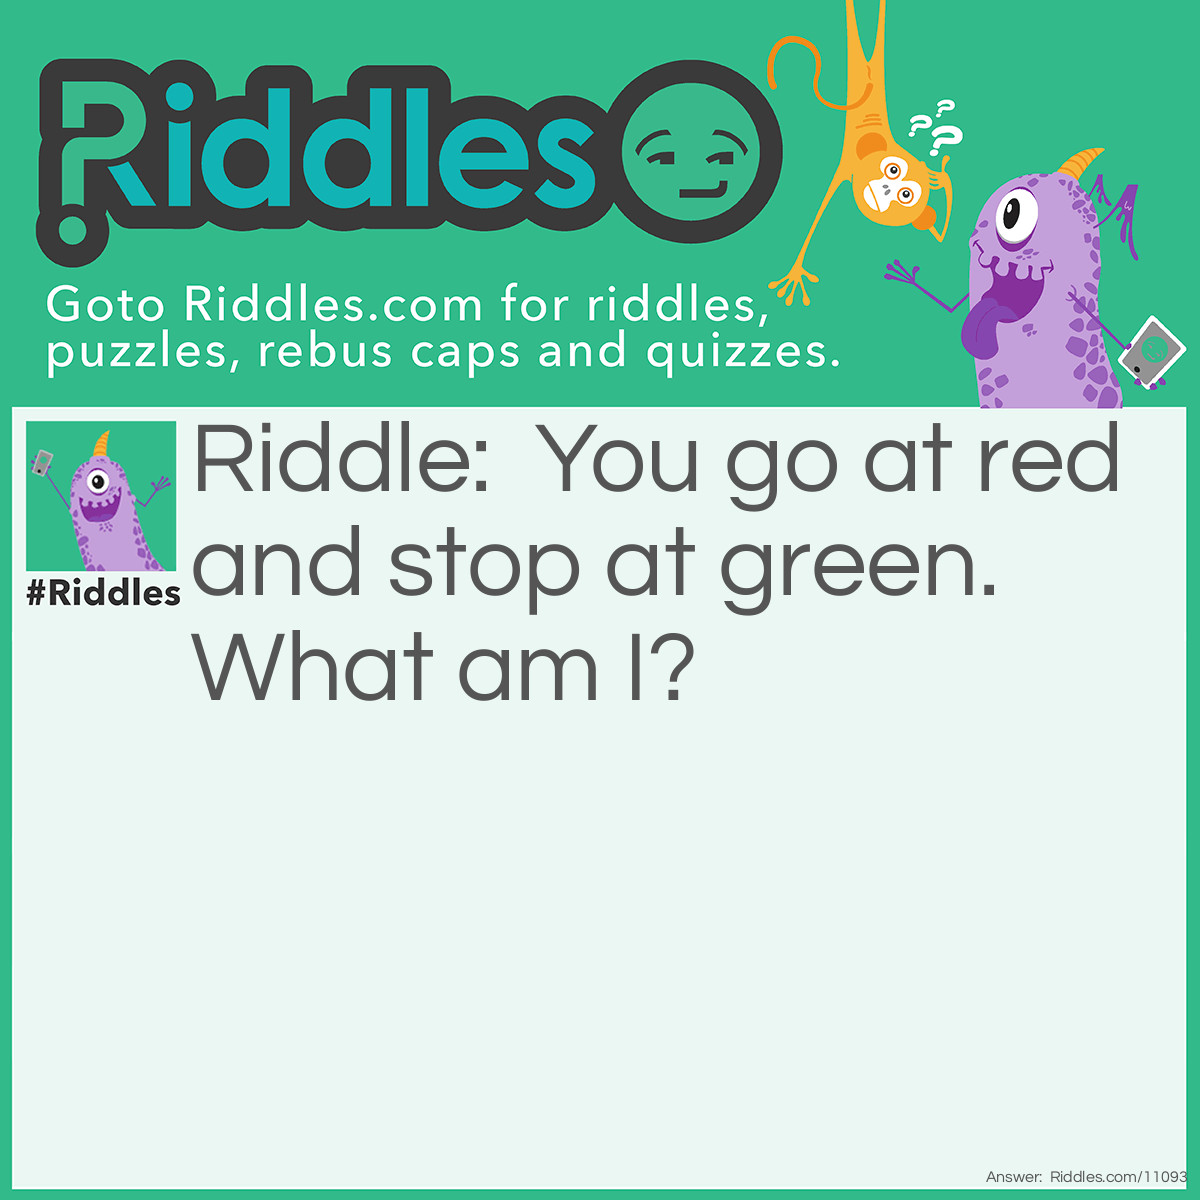 Riddle: You go at red and stop at green. What am I? Answer: A watermelon.